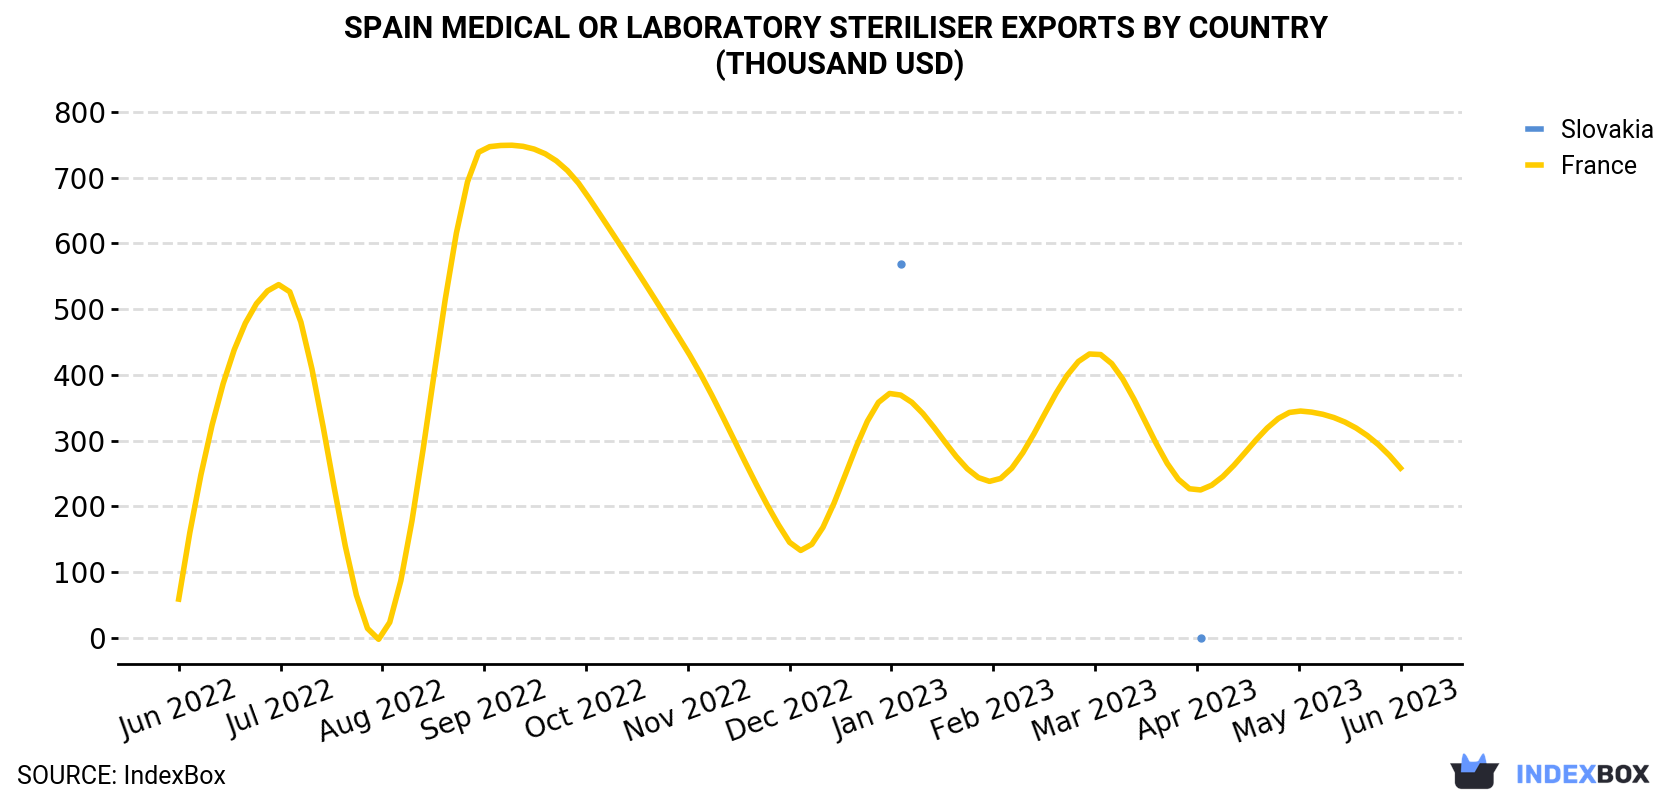 Spain Medical or Laboratory Steriliser Exports By Country (Thousand USD)